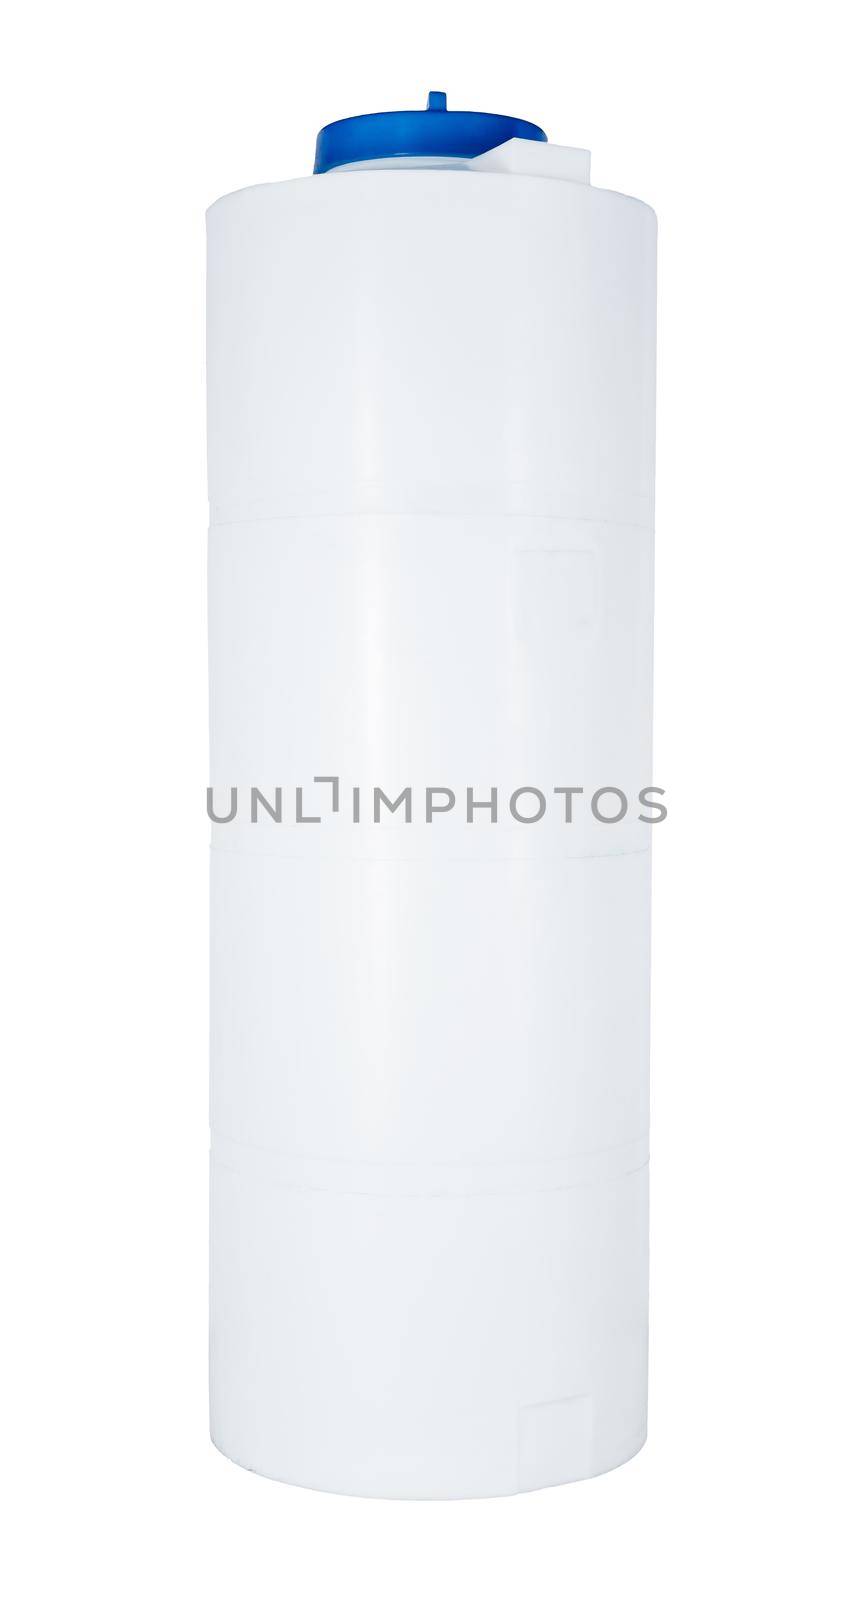 White plastic Water Tank isolated on white background by Fabrikasimf